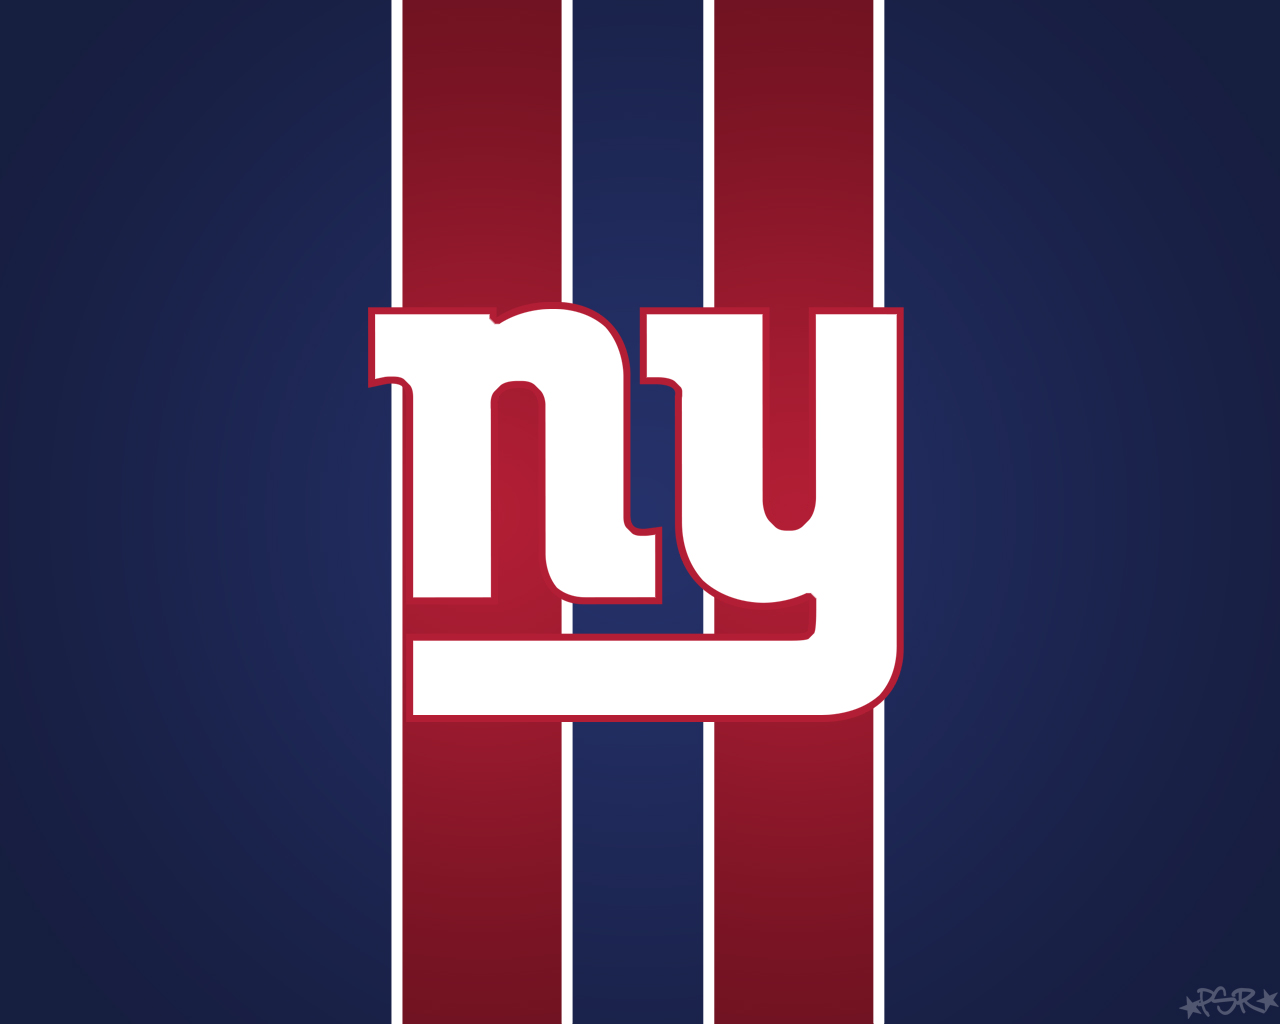 NEW YORK GIANTS Wallpaper Collection | Sports Geekery